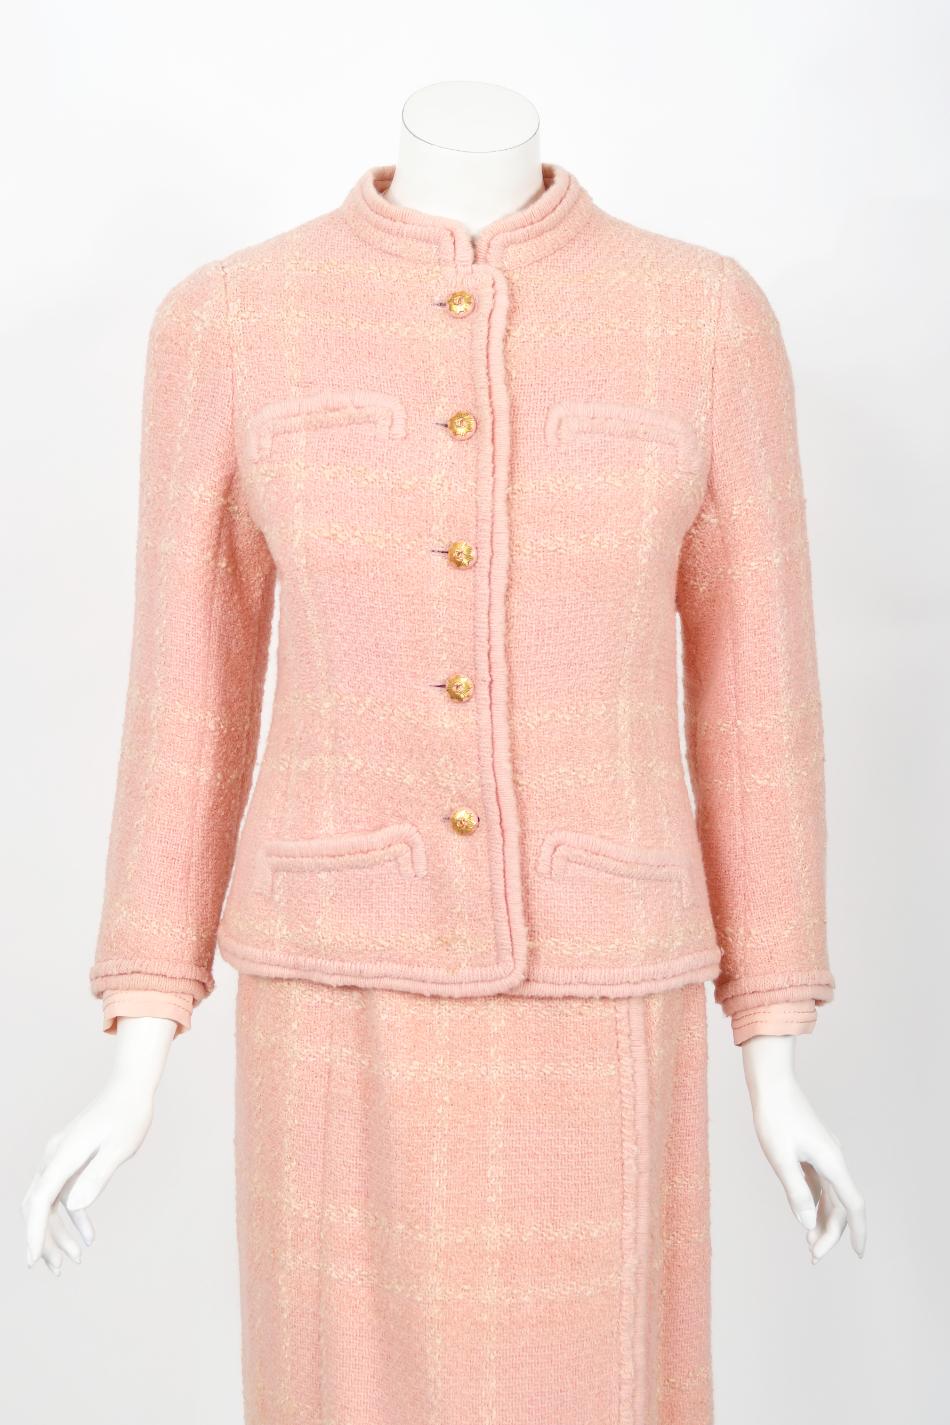 Vintage 1973 Chanel Haute Couture Documented Pink Wool Jacket Blouse Skirt Suit For Sale 7